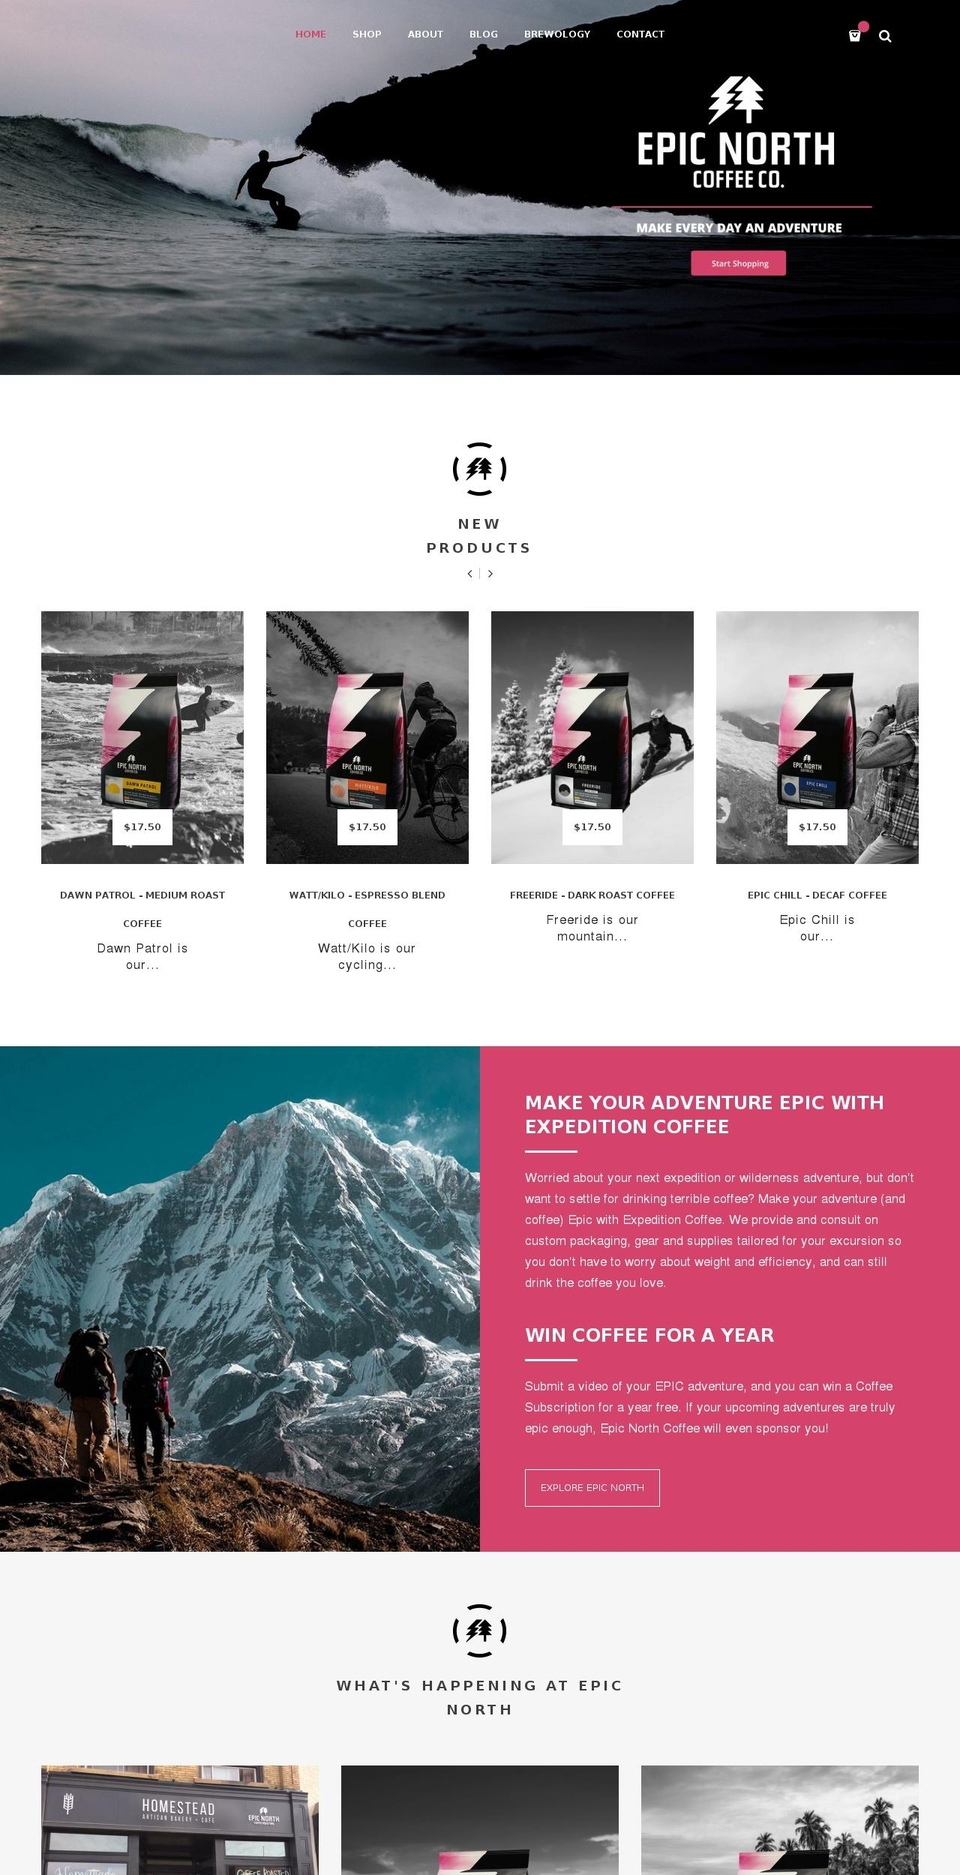 Epic North Coffee Shopify theme site example epicnorthcoffee.com